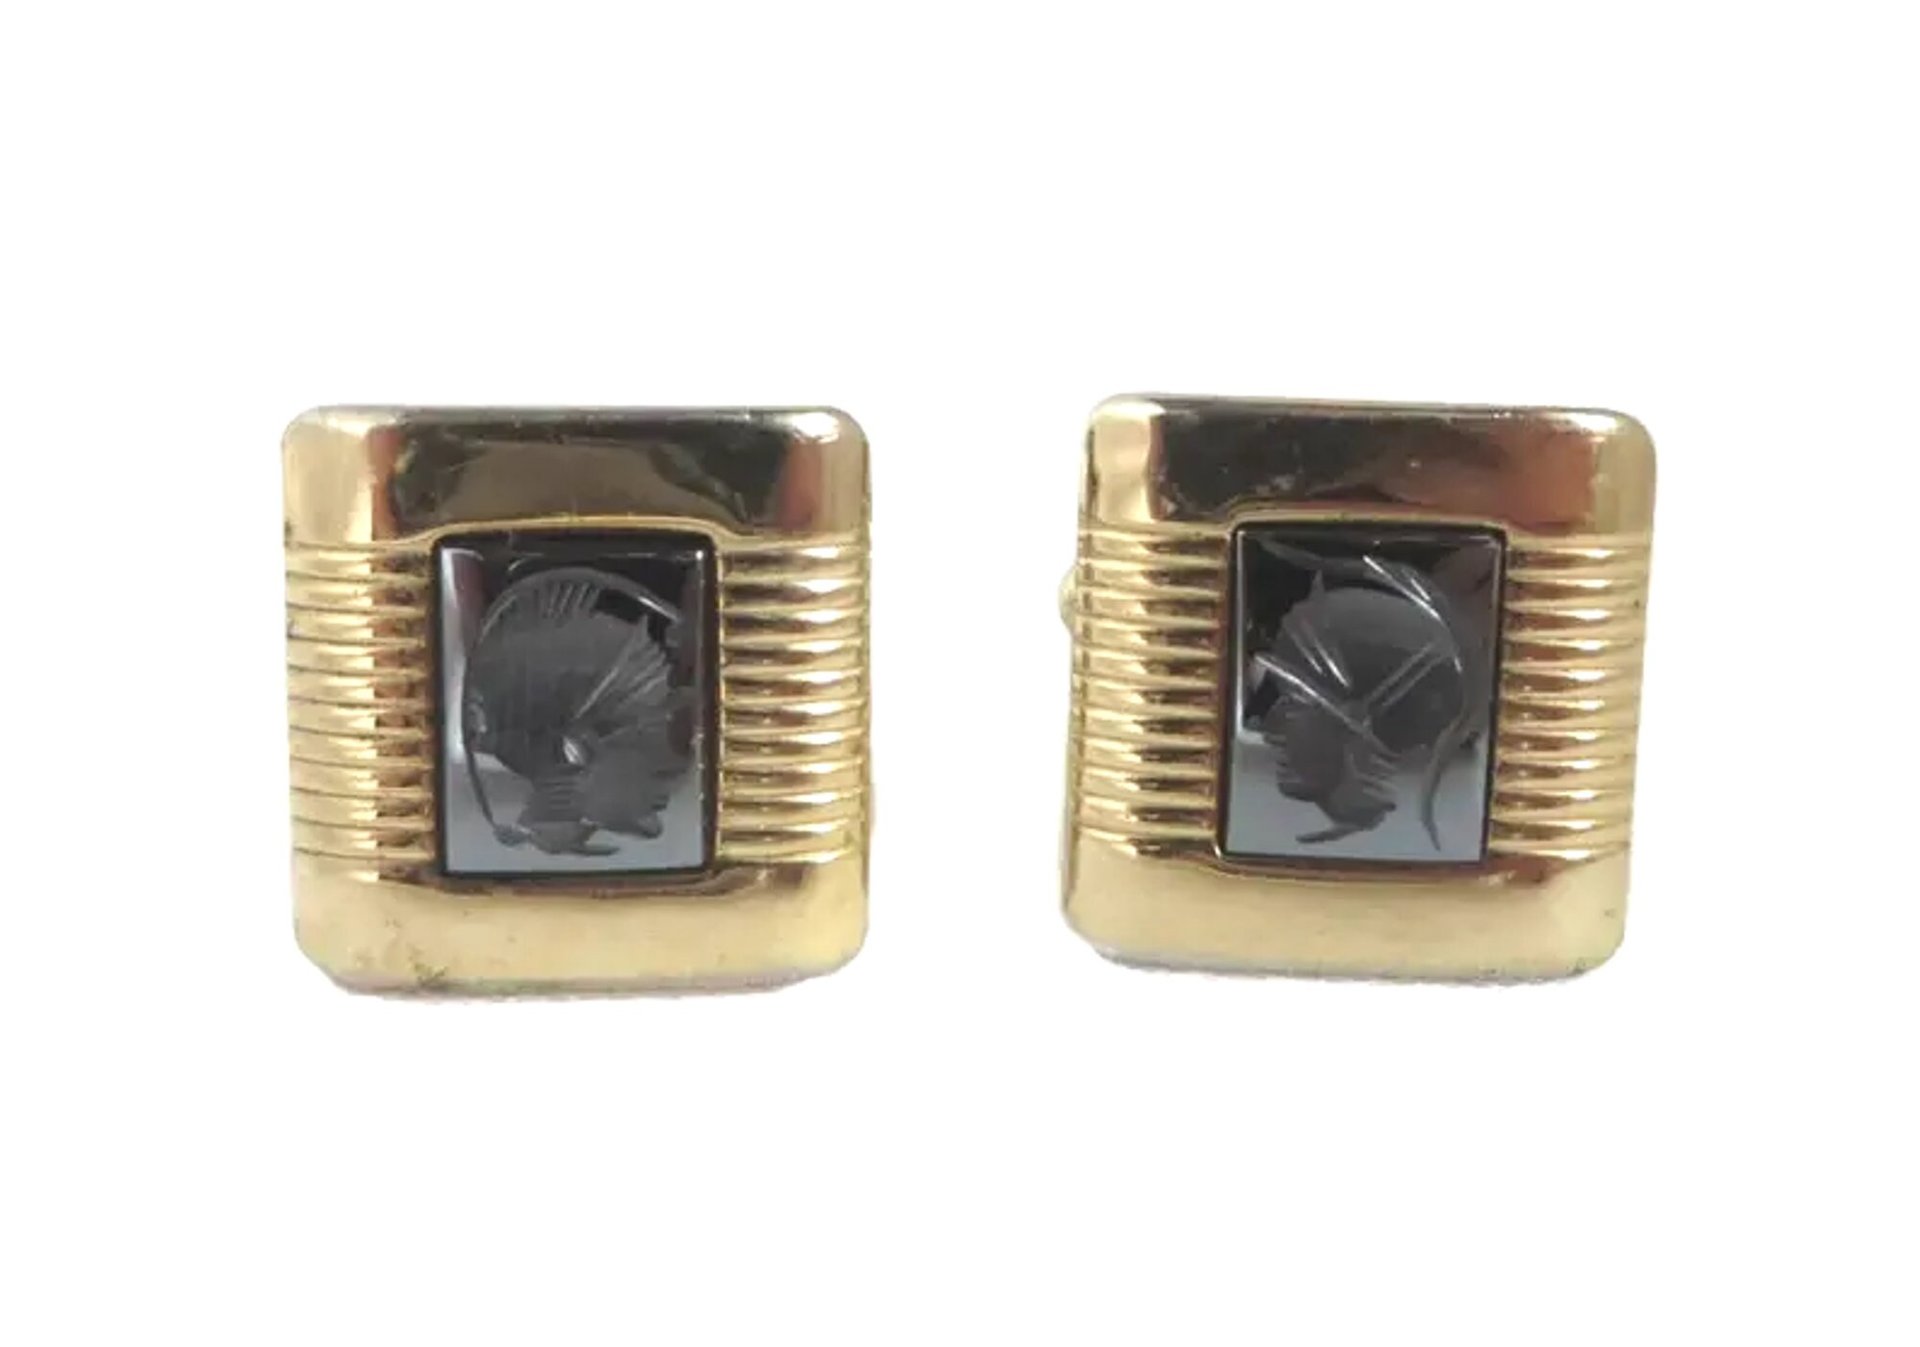 Black Carved Roman Soldier Gold Tone Cuff Links